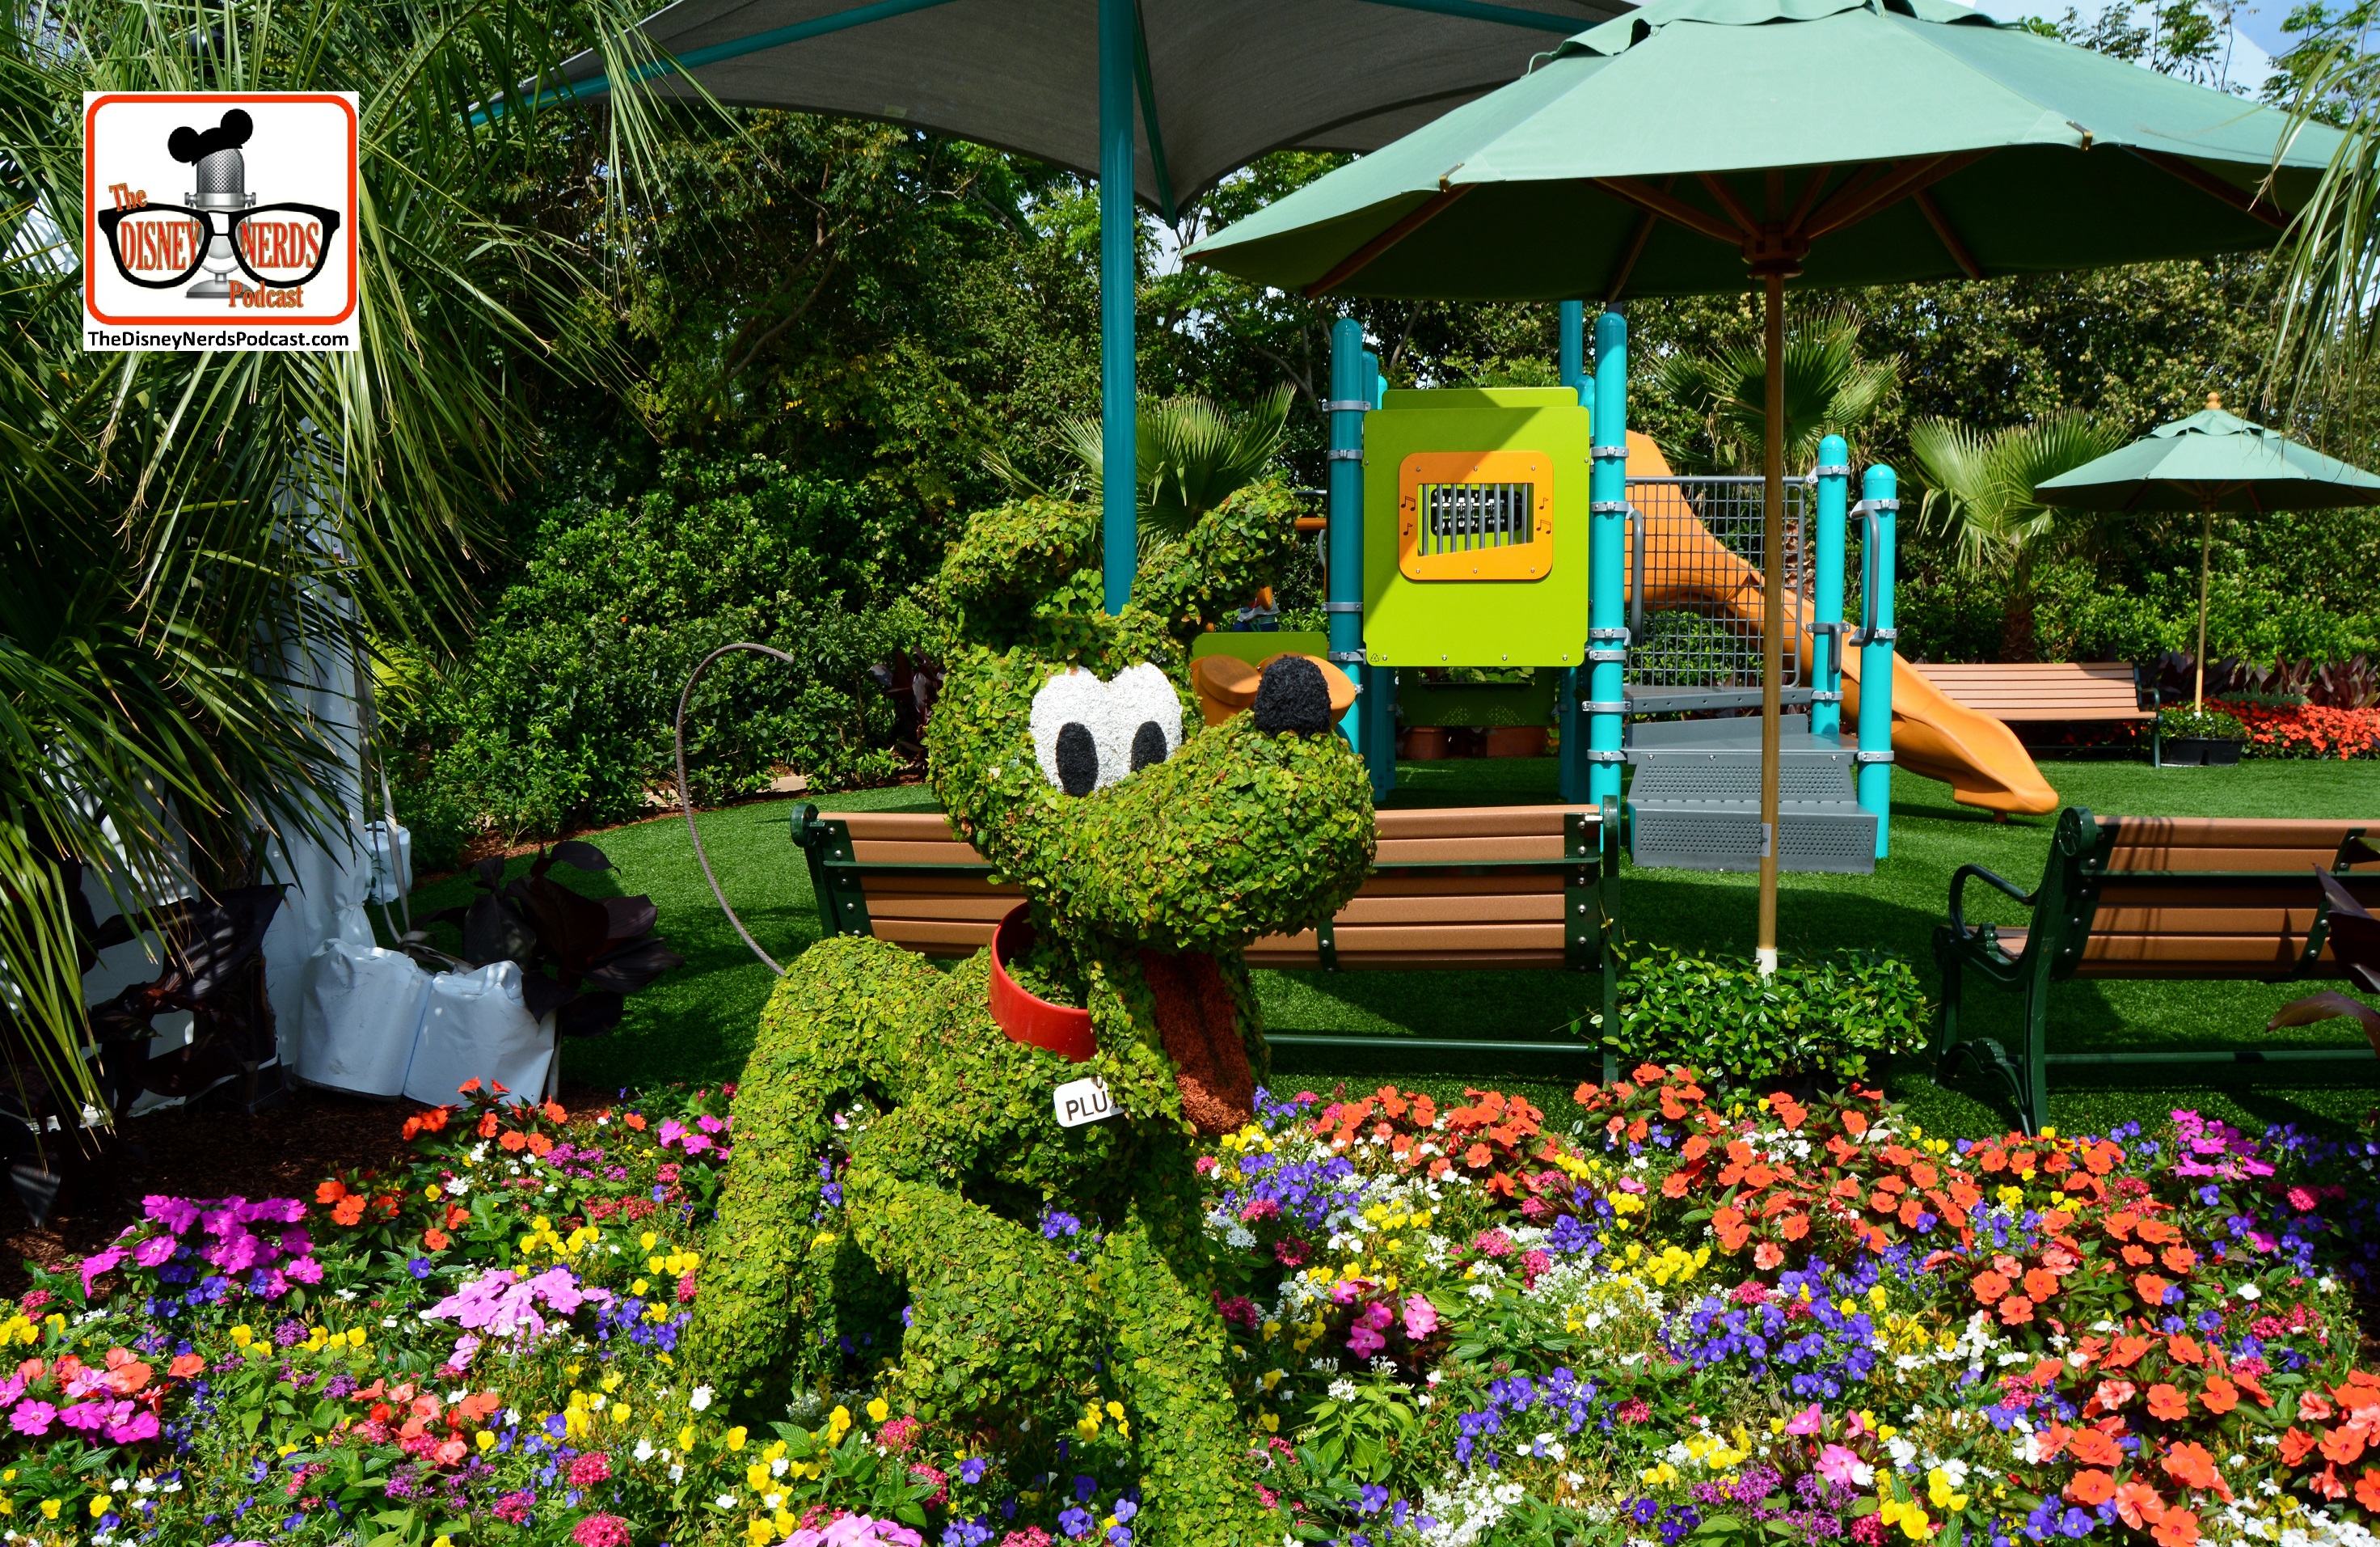 DNP April 2016 Photo Report: Epcot Flower and Garden Festival Pluto in the Kids Play Area - the Harmany Garden.